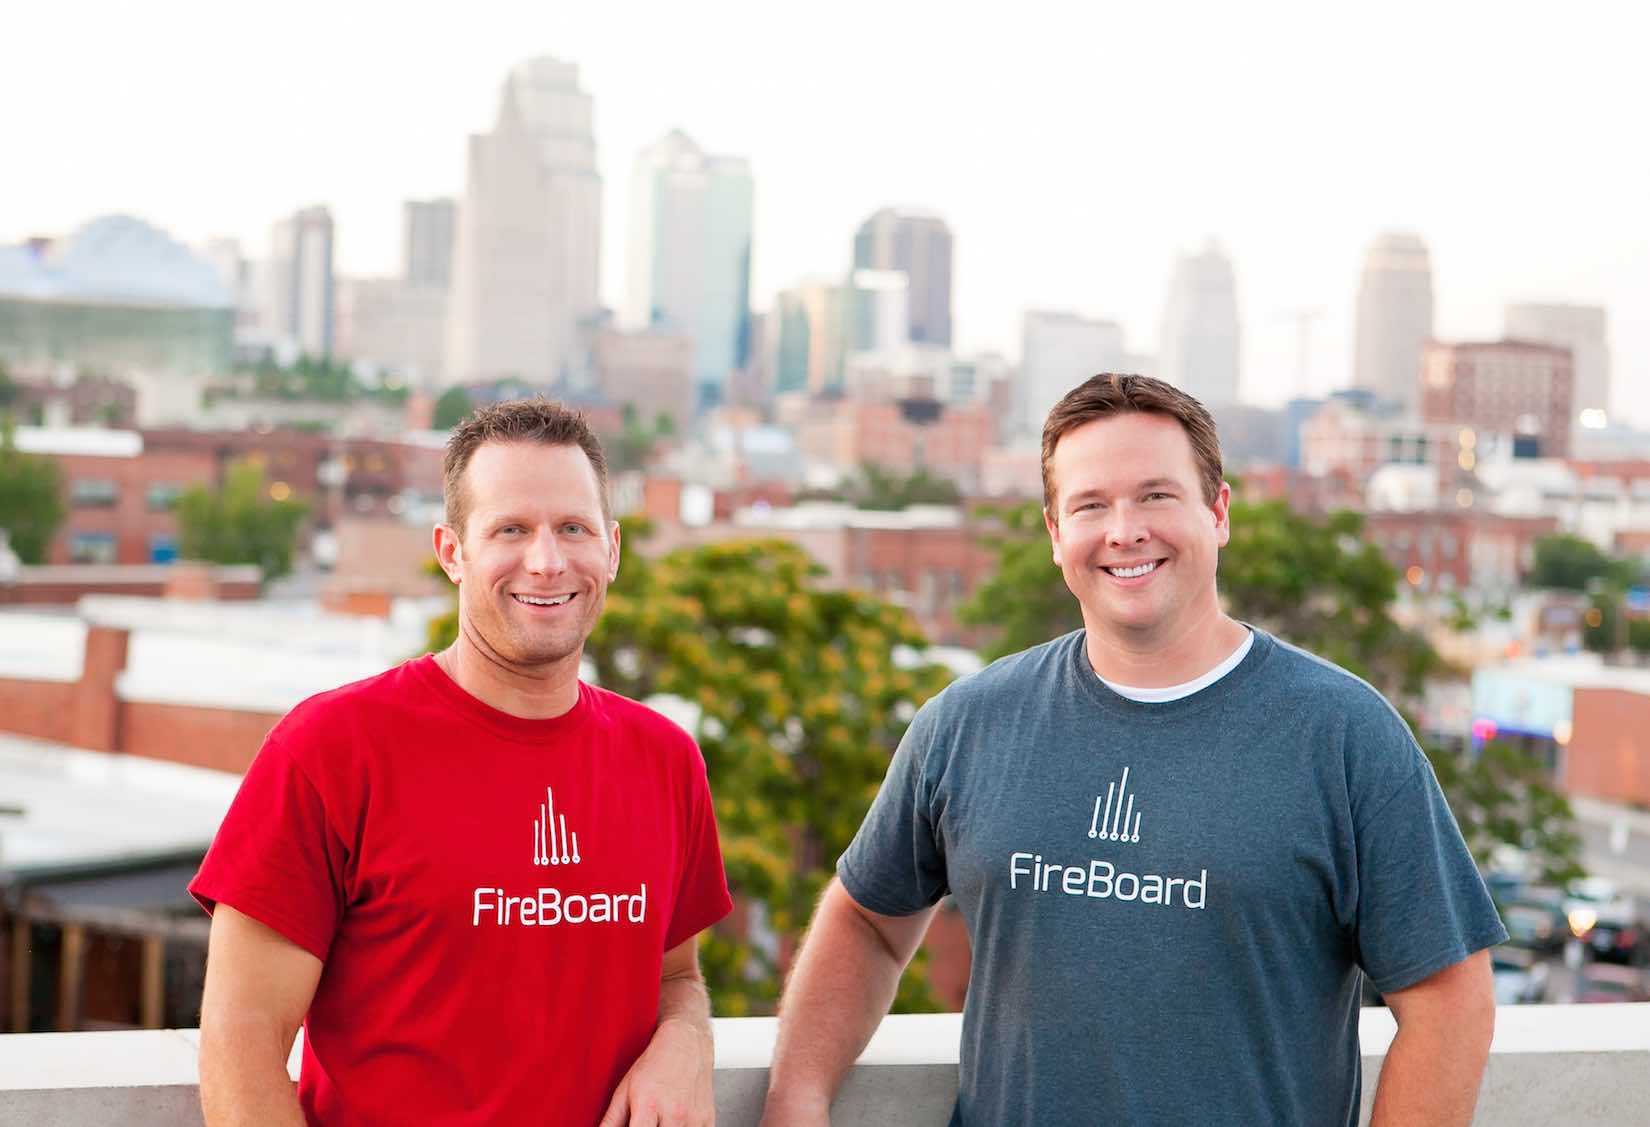 Fireboard Labs Product Photo Shoot. Kansas City Commercial Portrait and Wedding Photographers ©Kevin Ashley Photography